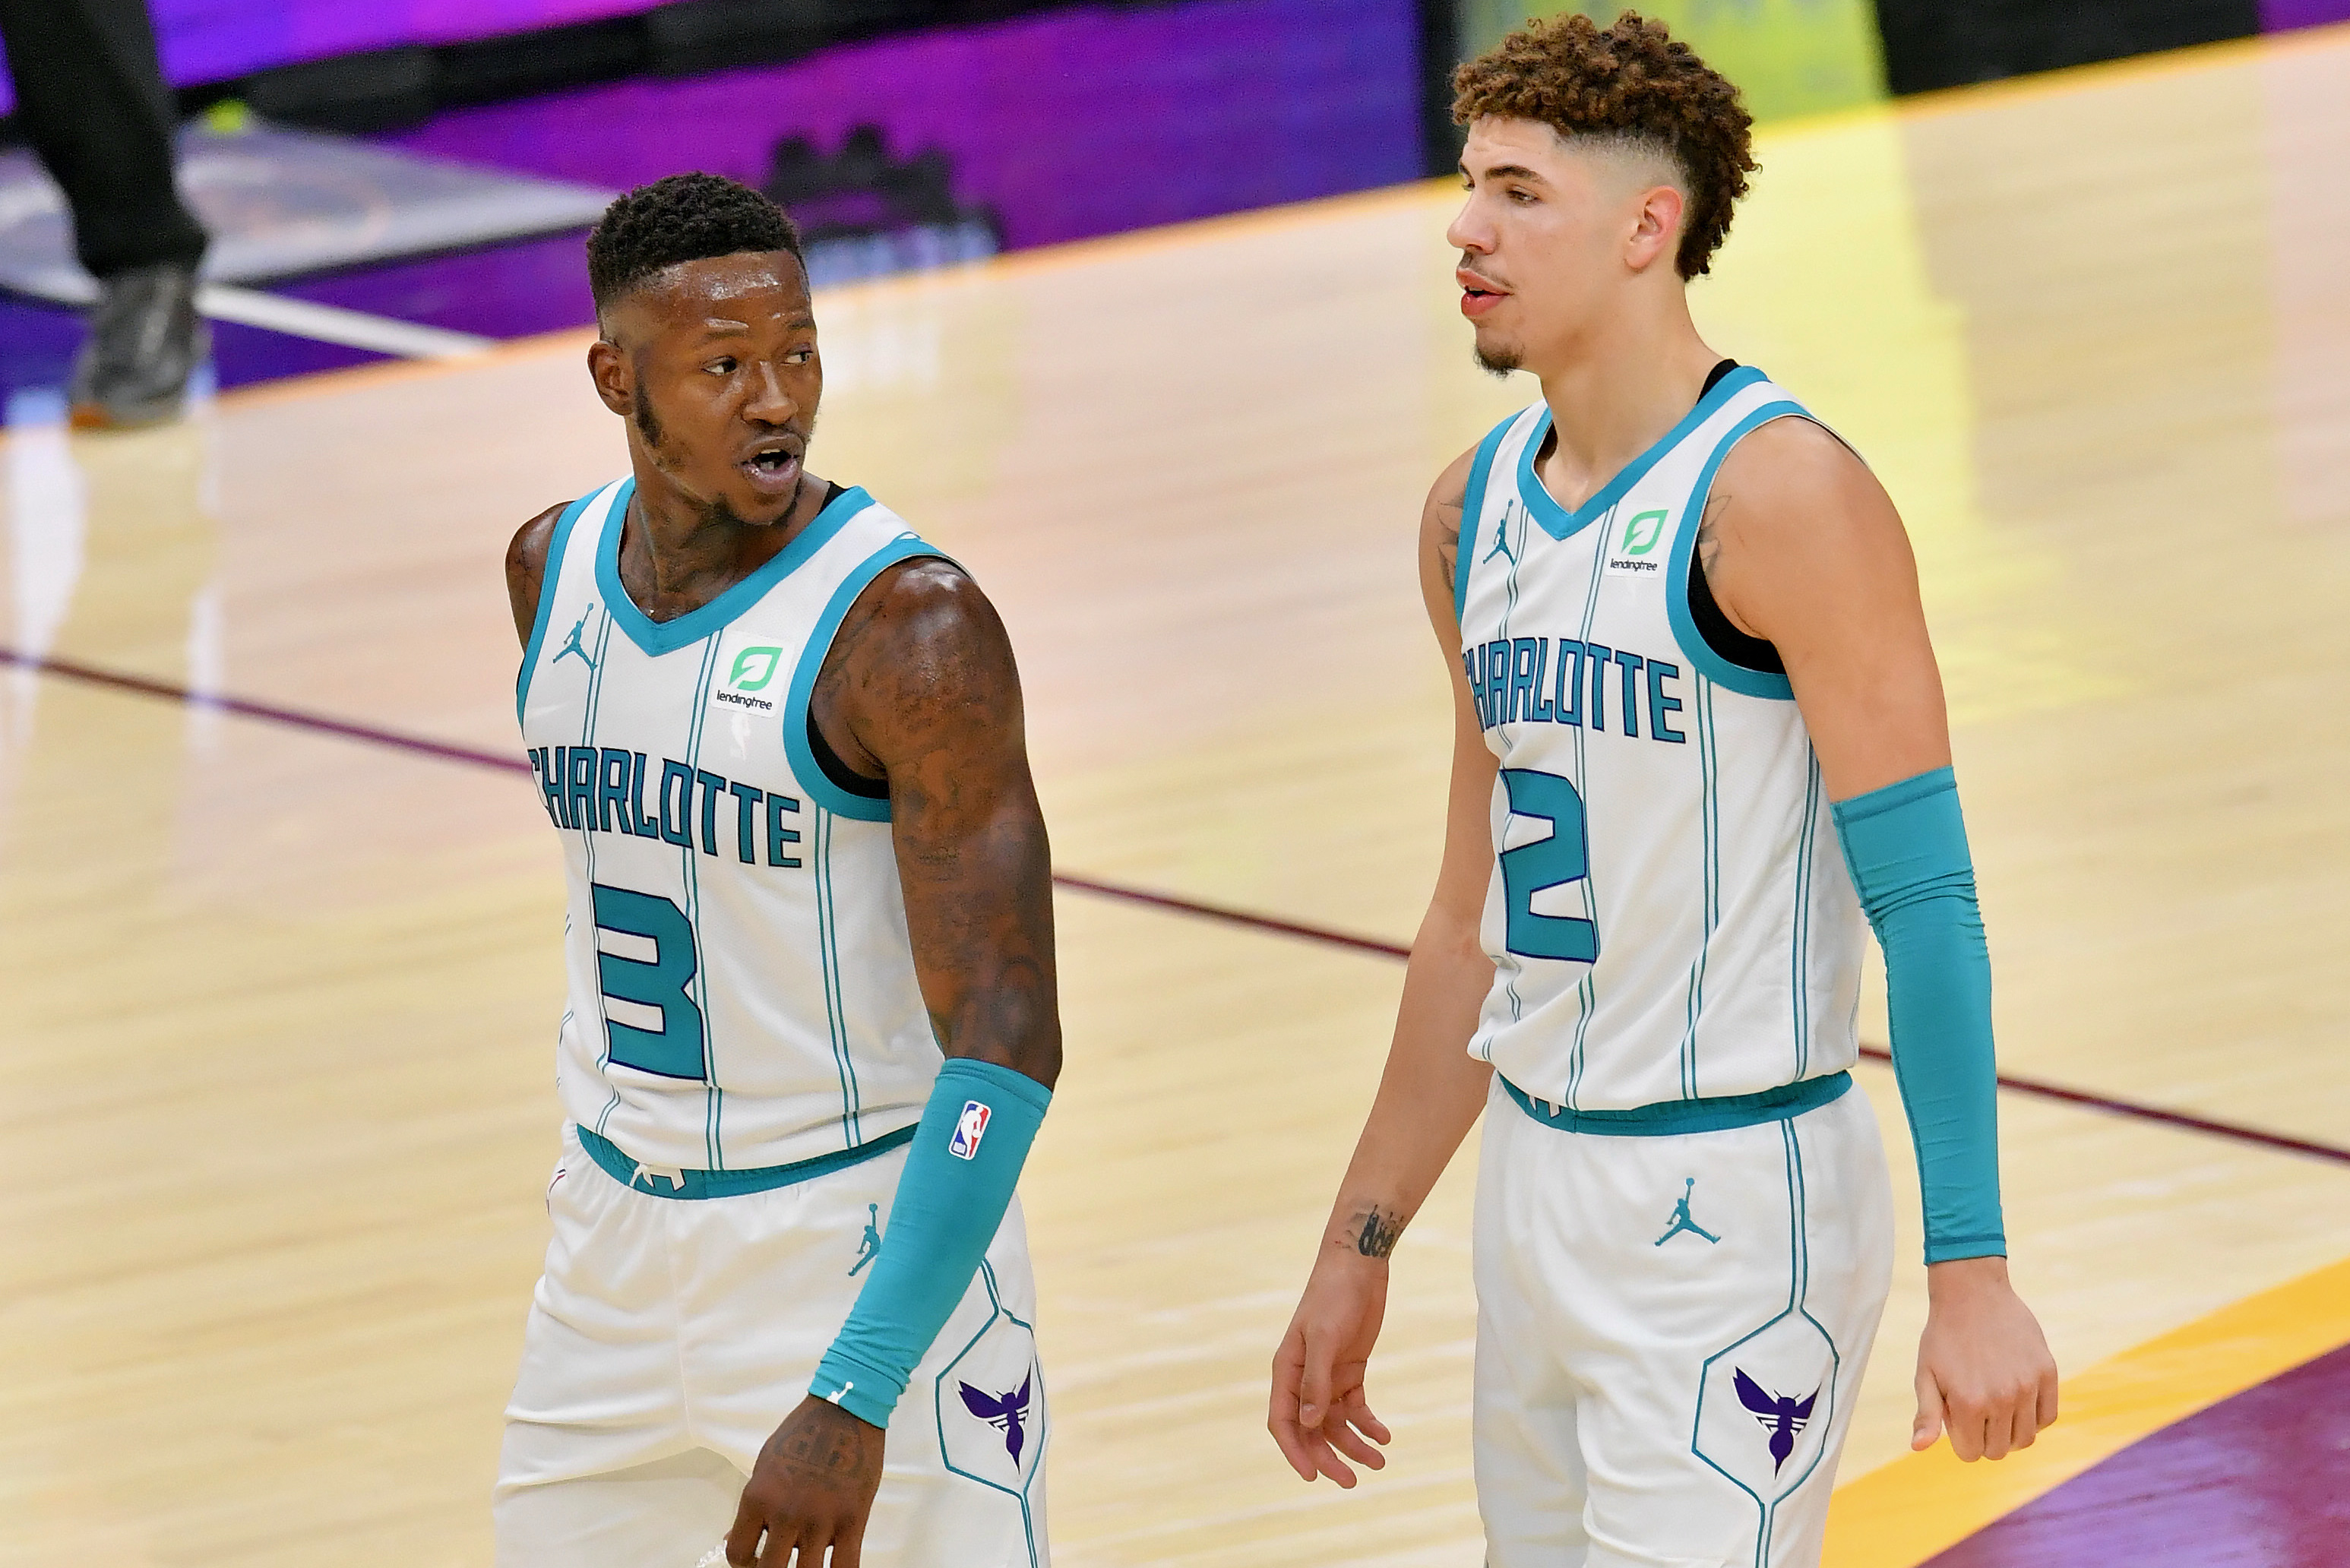 Michael Jordan pushed Terry Rozier to sign with Hornets over Suns